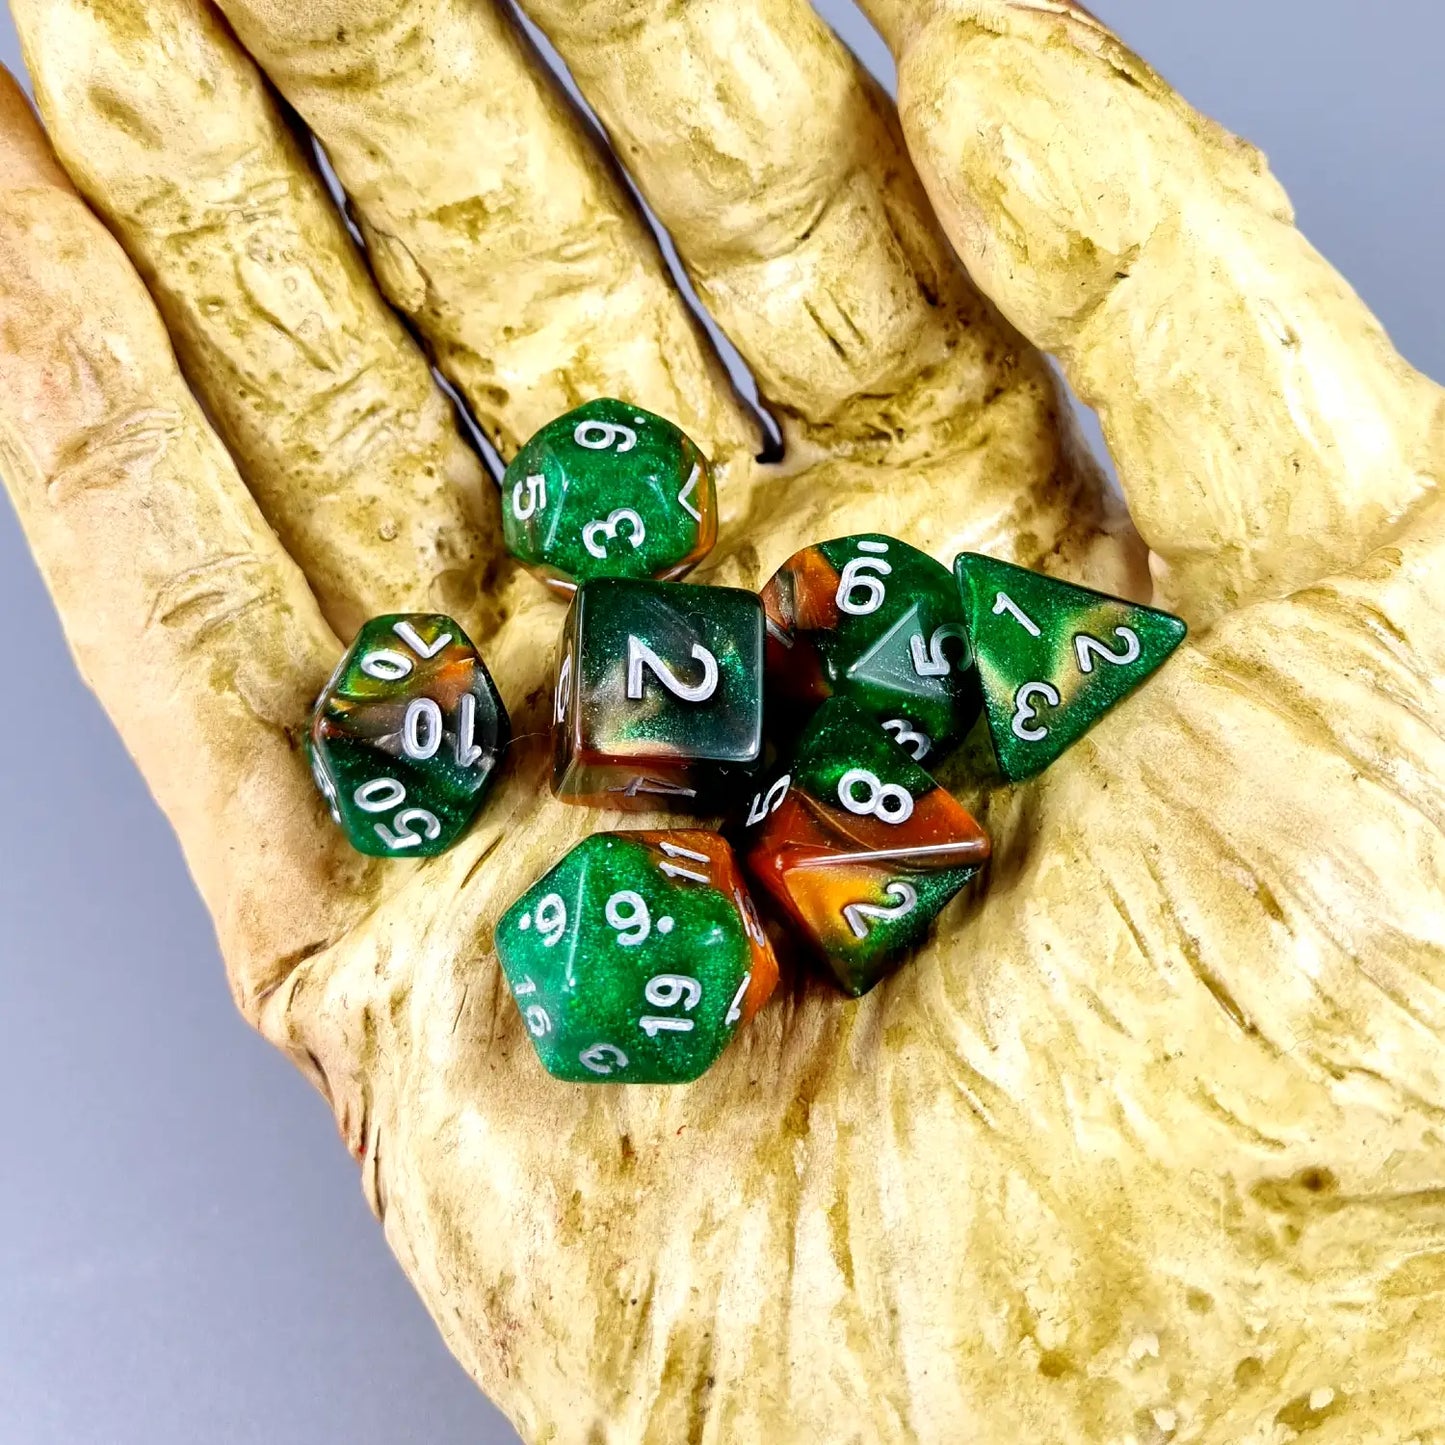 Green & Gold Cosmos Dungeons & Dragons Dice Set